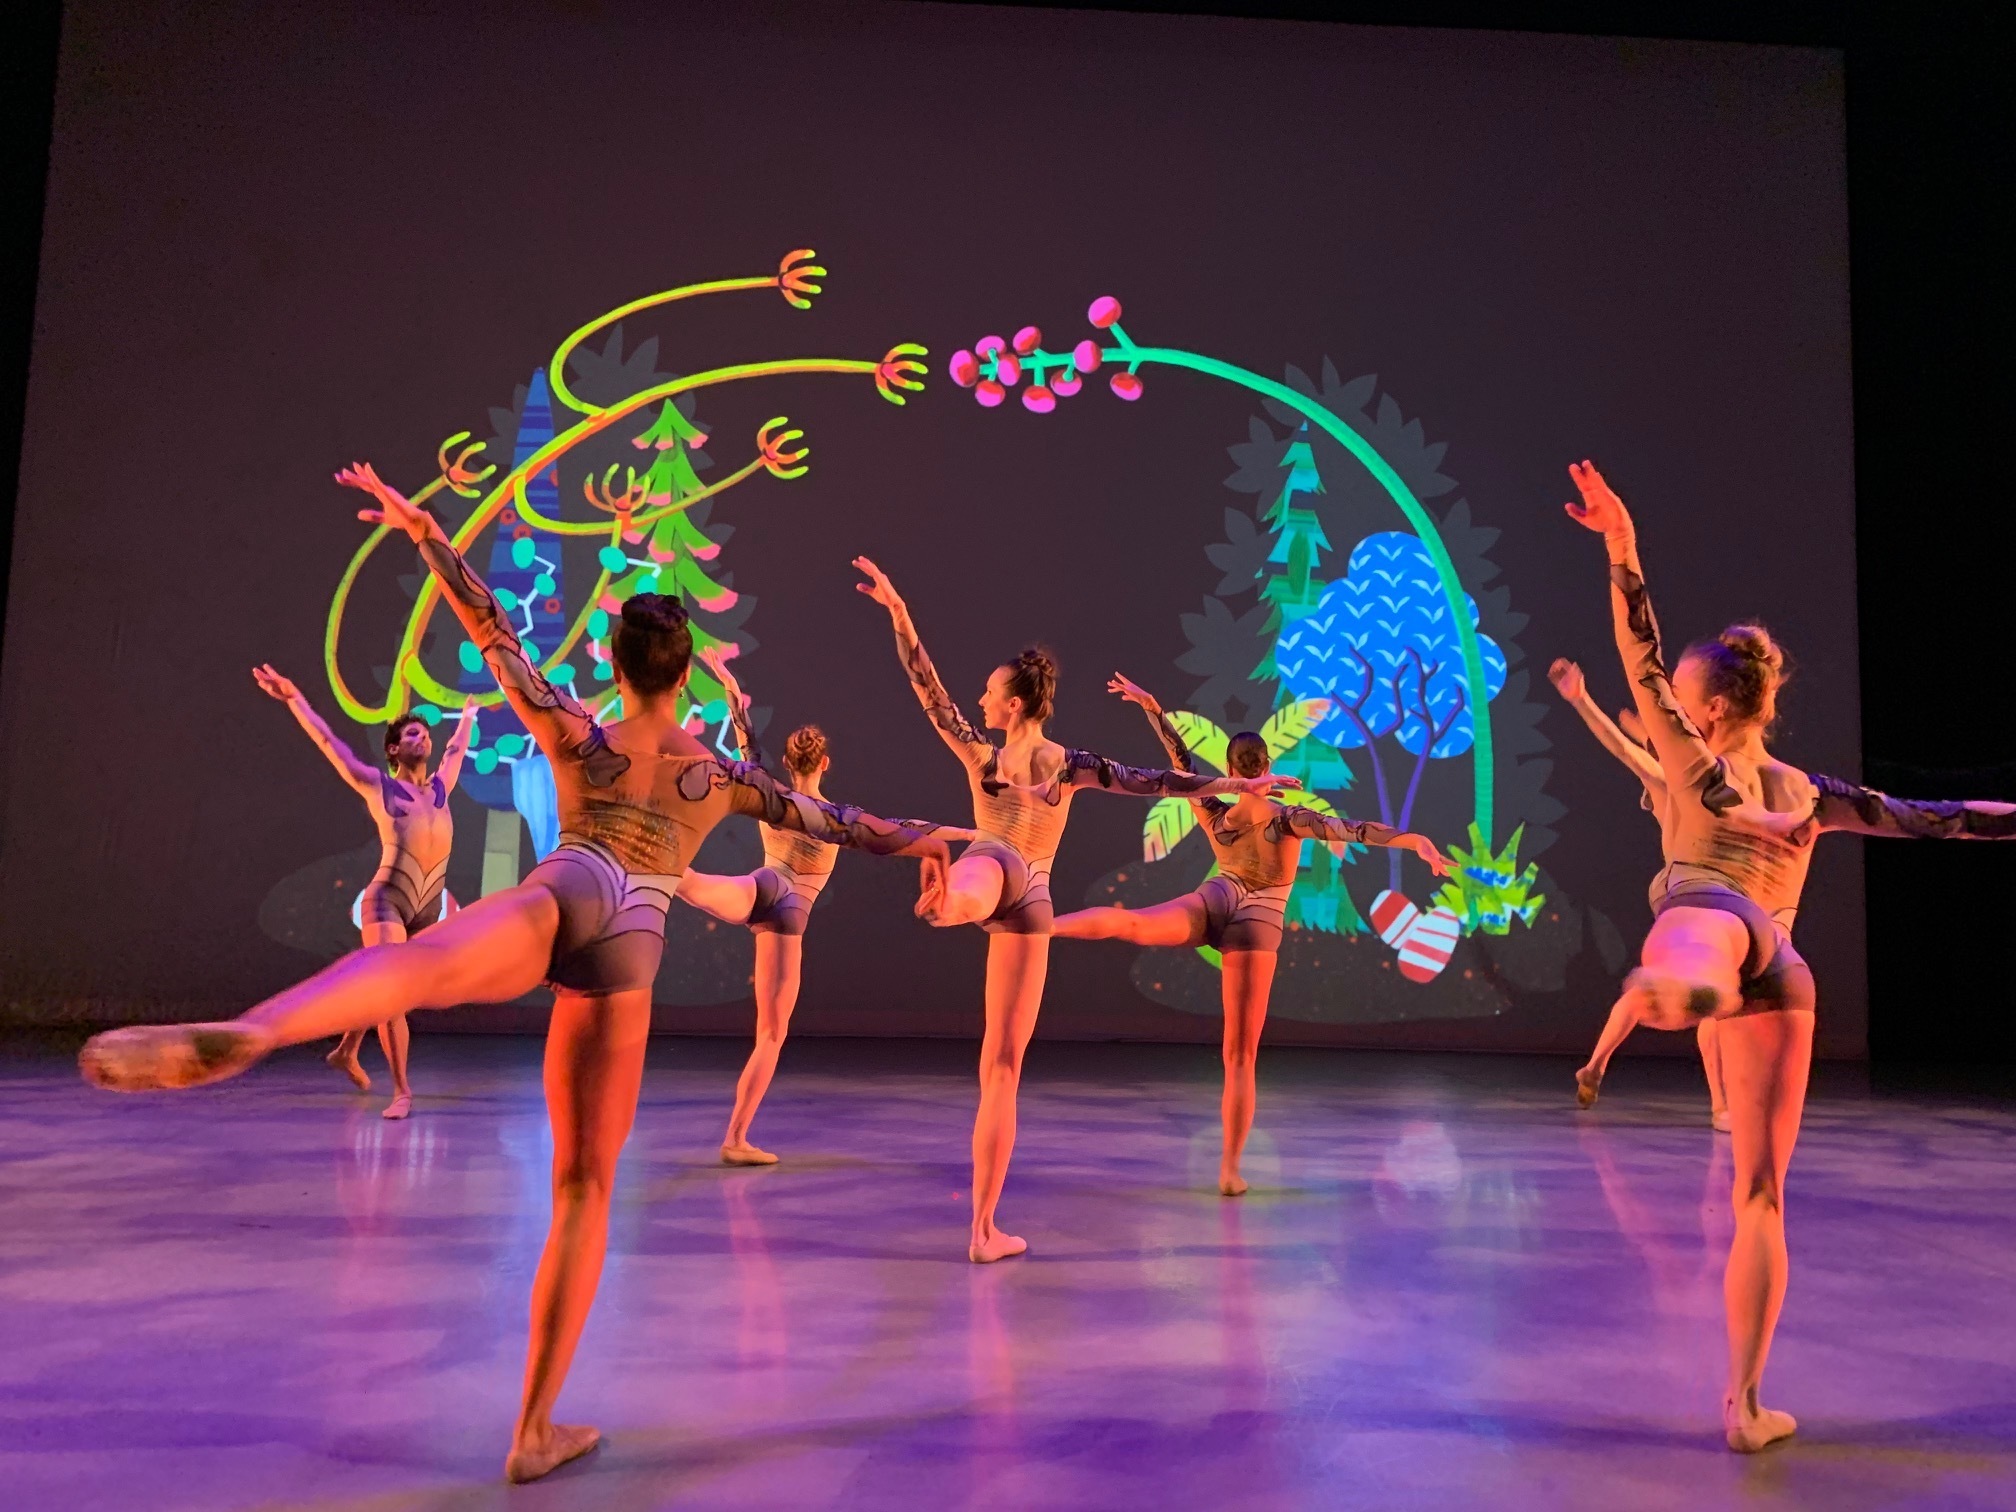 Flyway (2019) 17 minute animation, projection; collaboration with Kyle Statham; commissioned for Ballet Memphis performance Spring Mix; based on 2014 set design by Erin Harmon